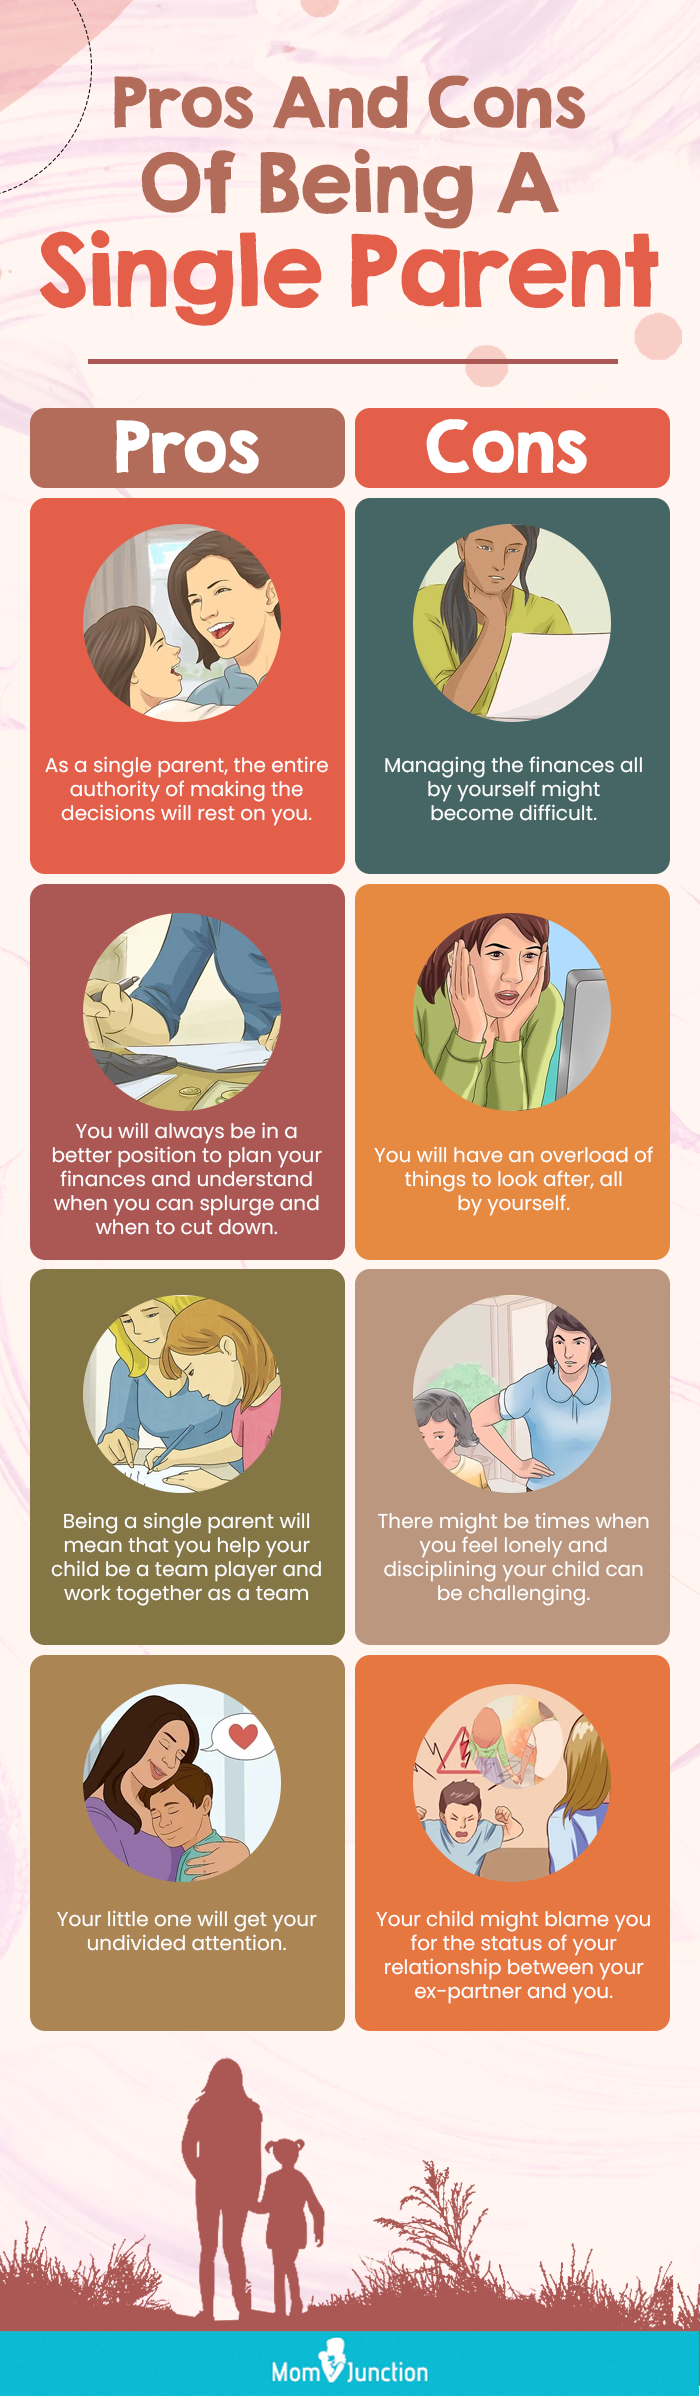 pros and cons of being a single parent (infographic)